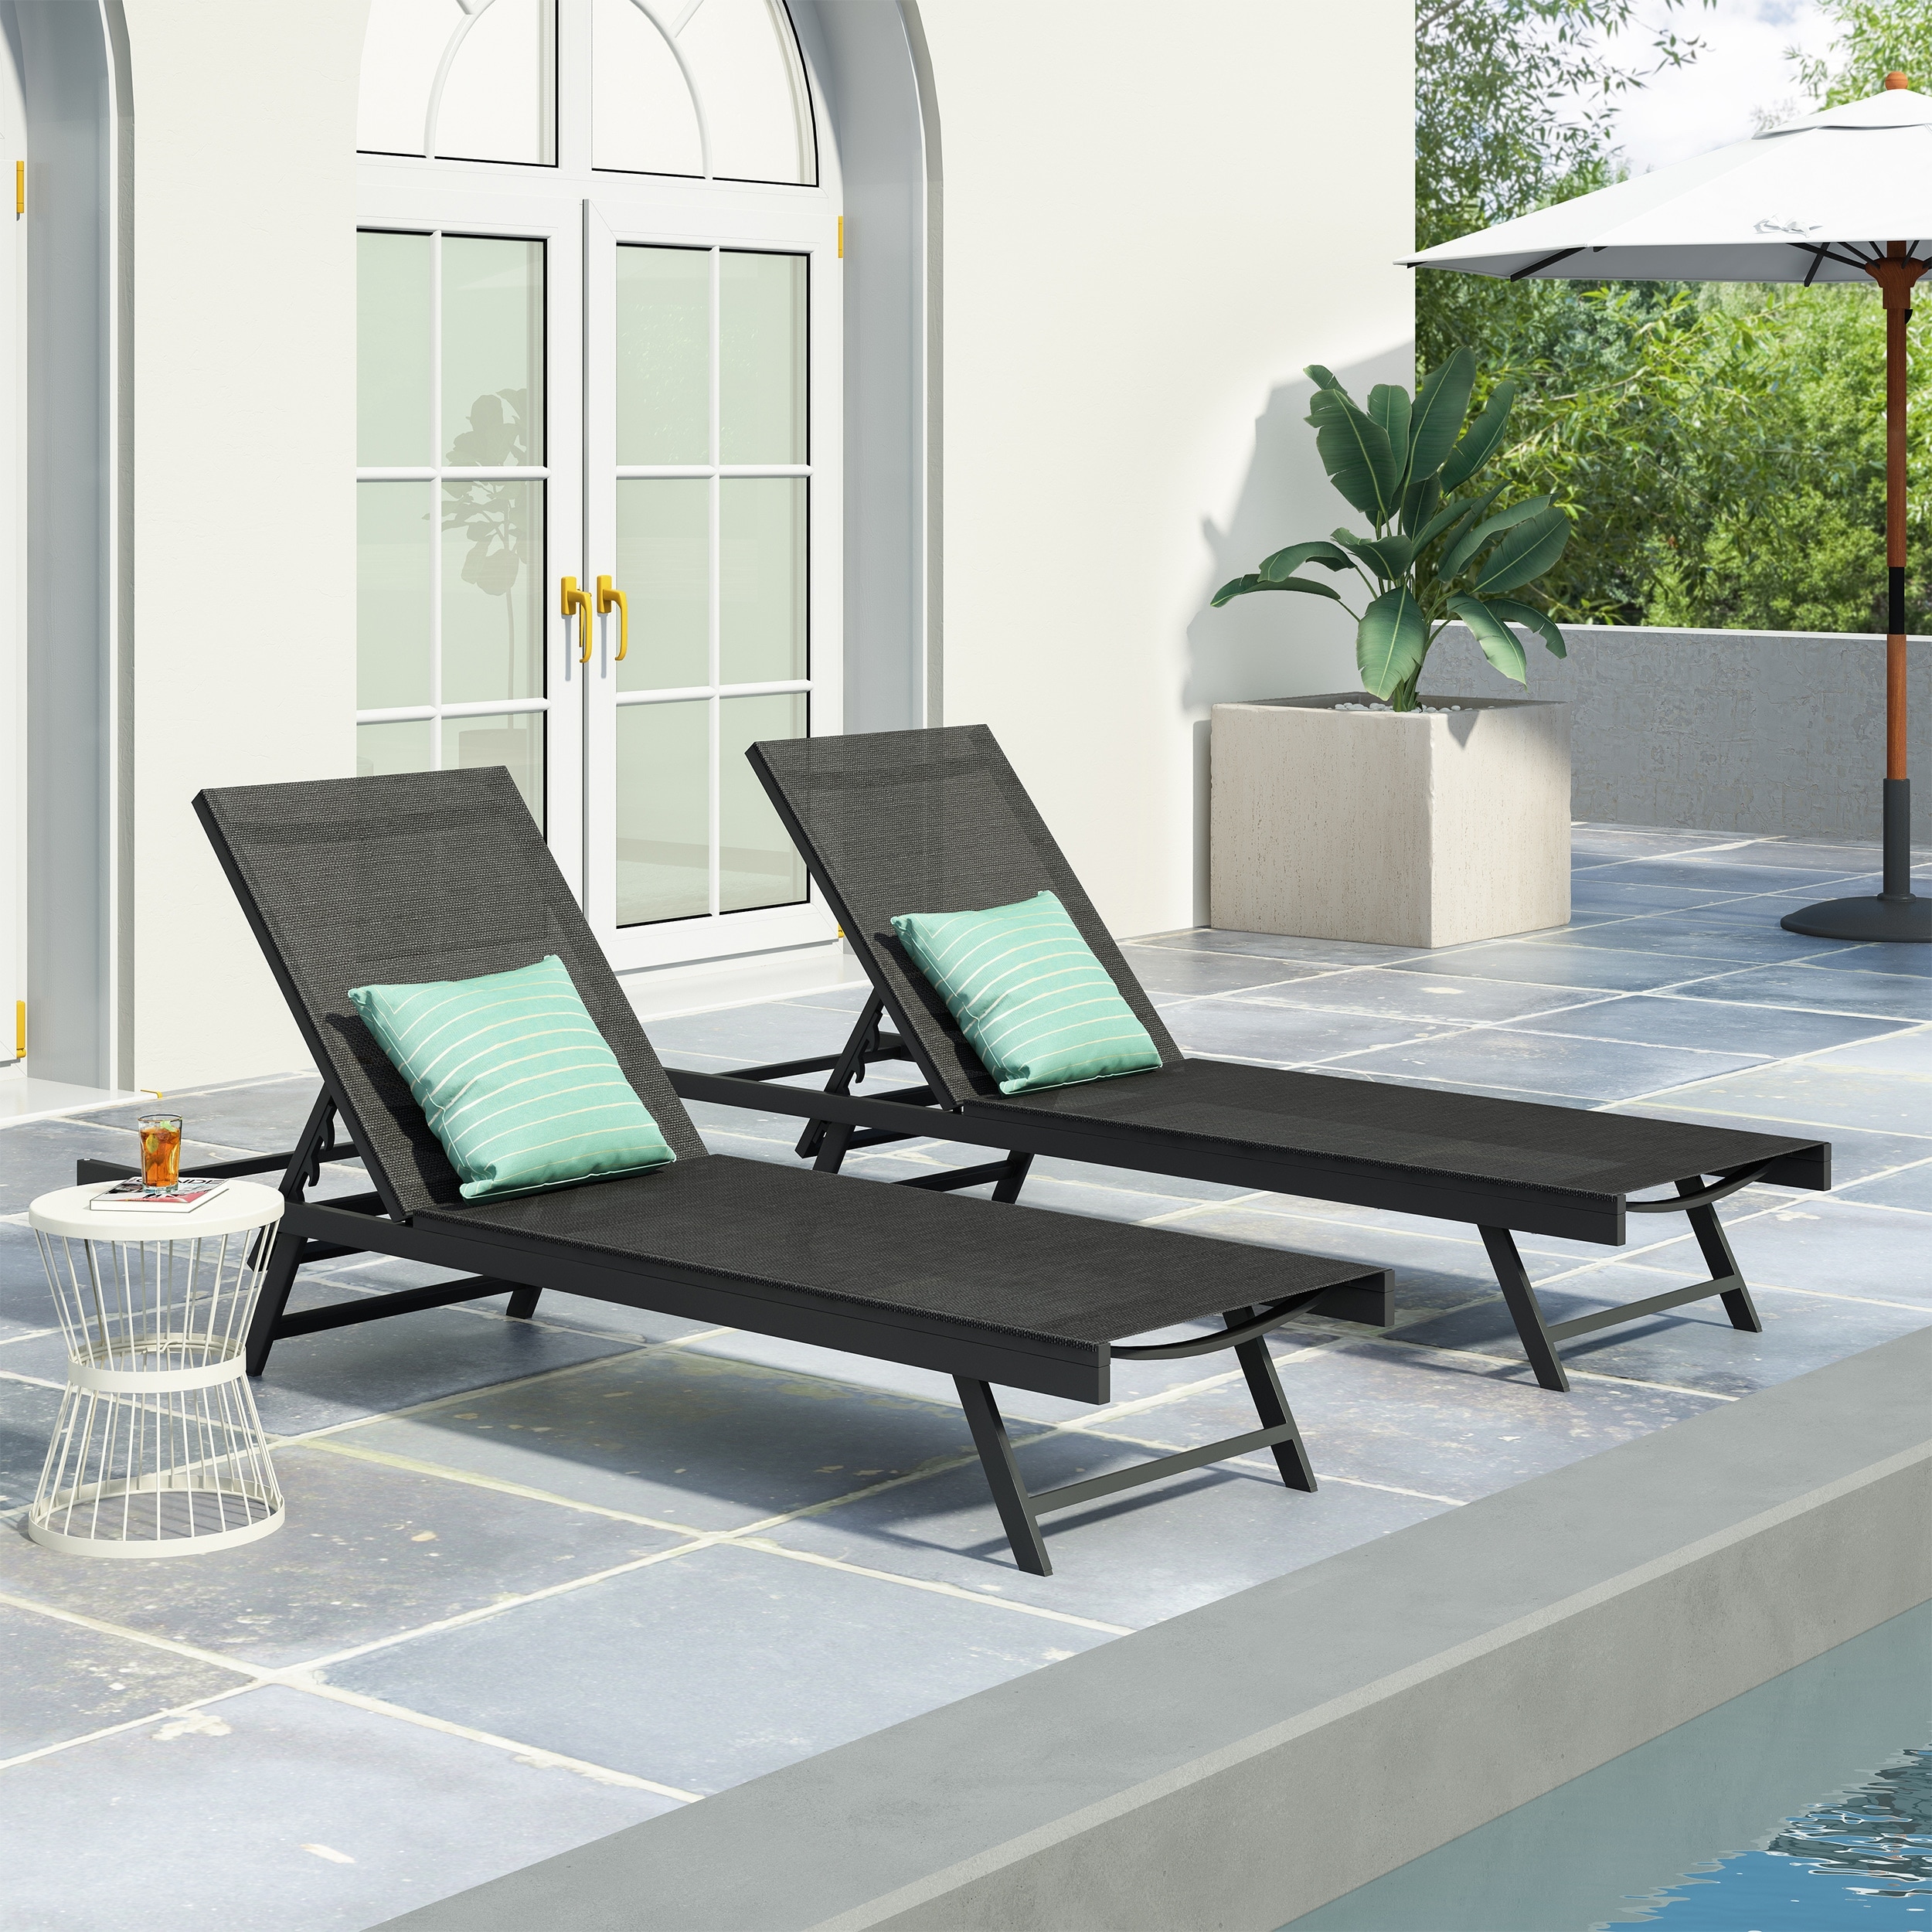 Salton Outdoor Aluminum Chaise Lounge With Mesh Seating (set Of 2) By Christopher Knight Home